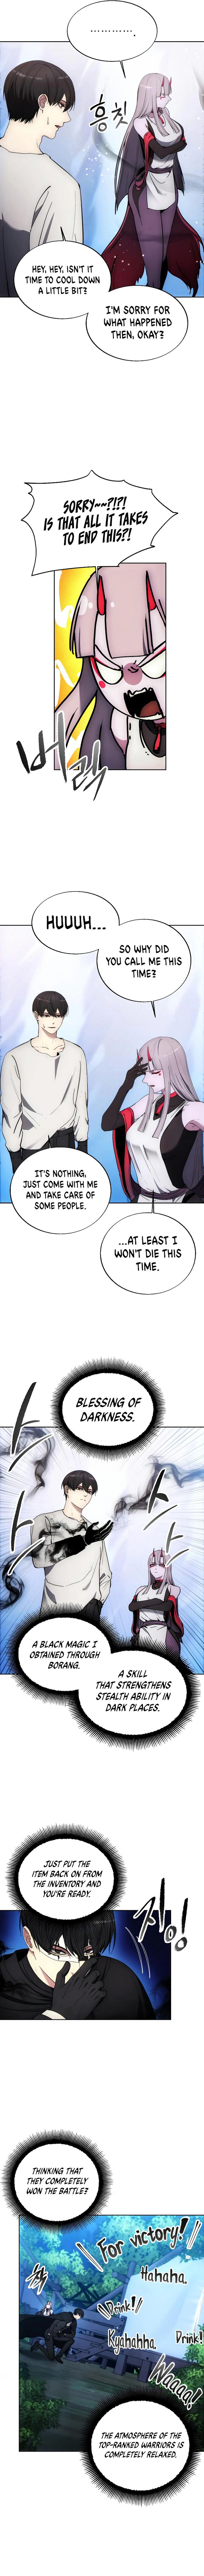 How To Live As A Villain Chapter 123 Page 8